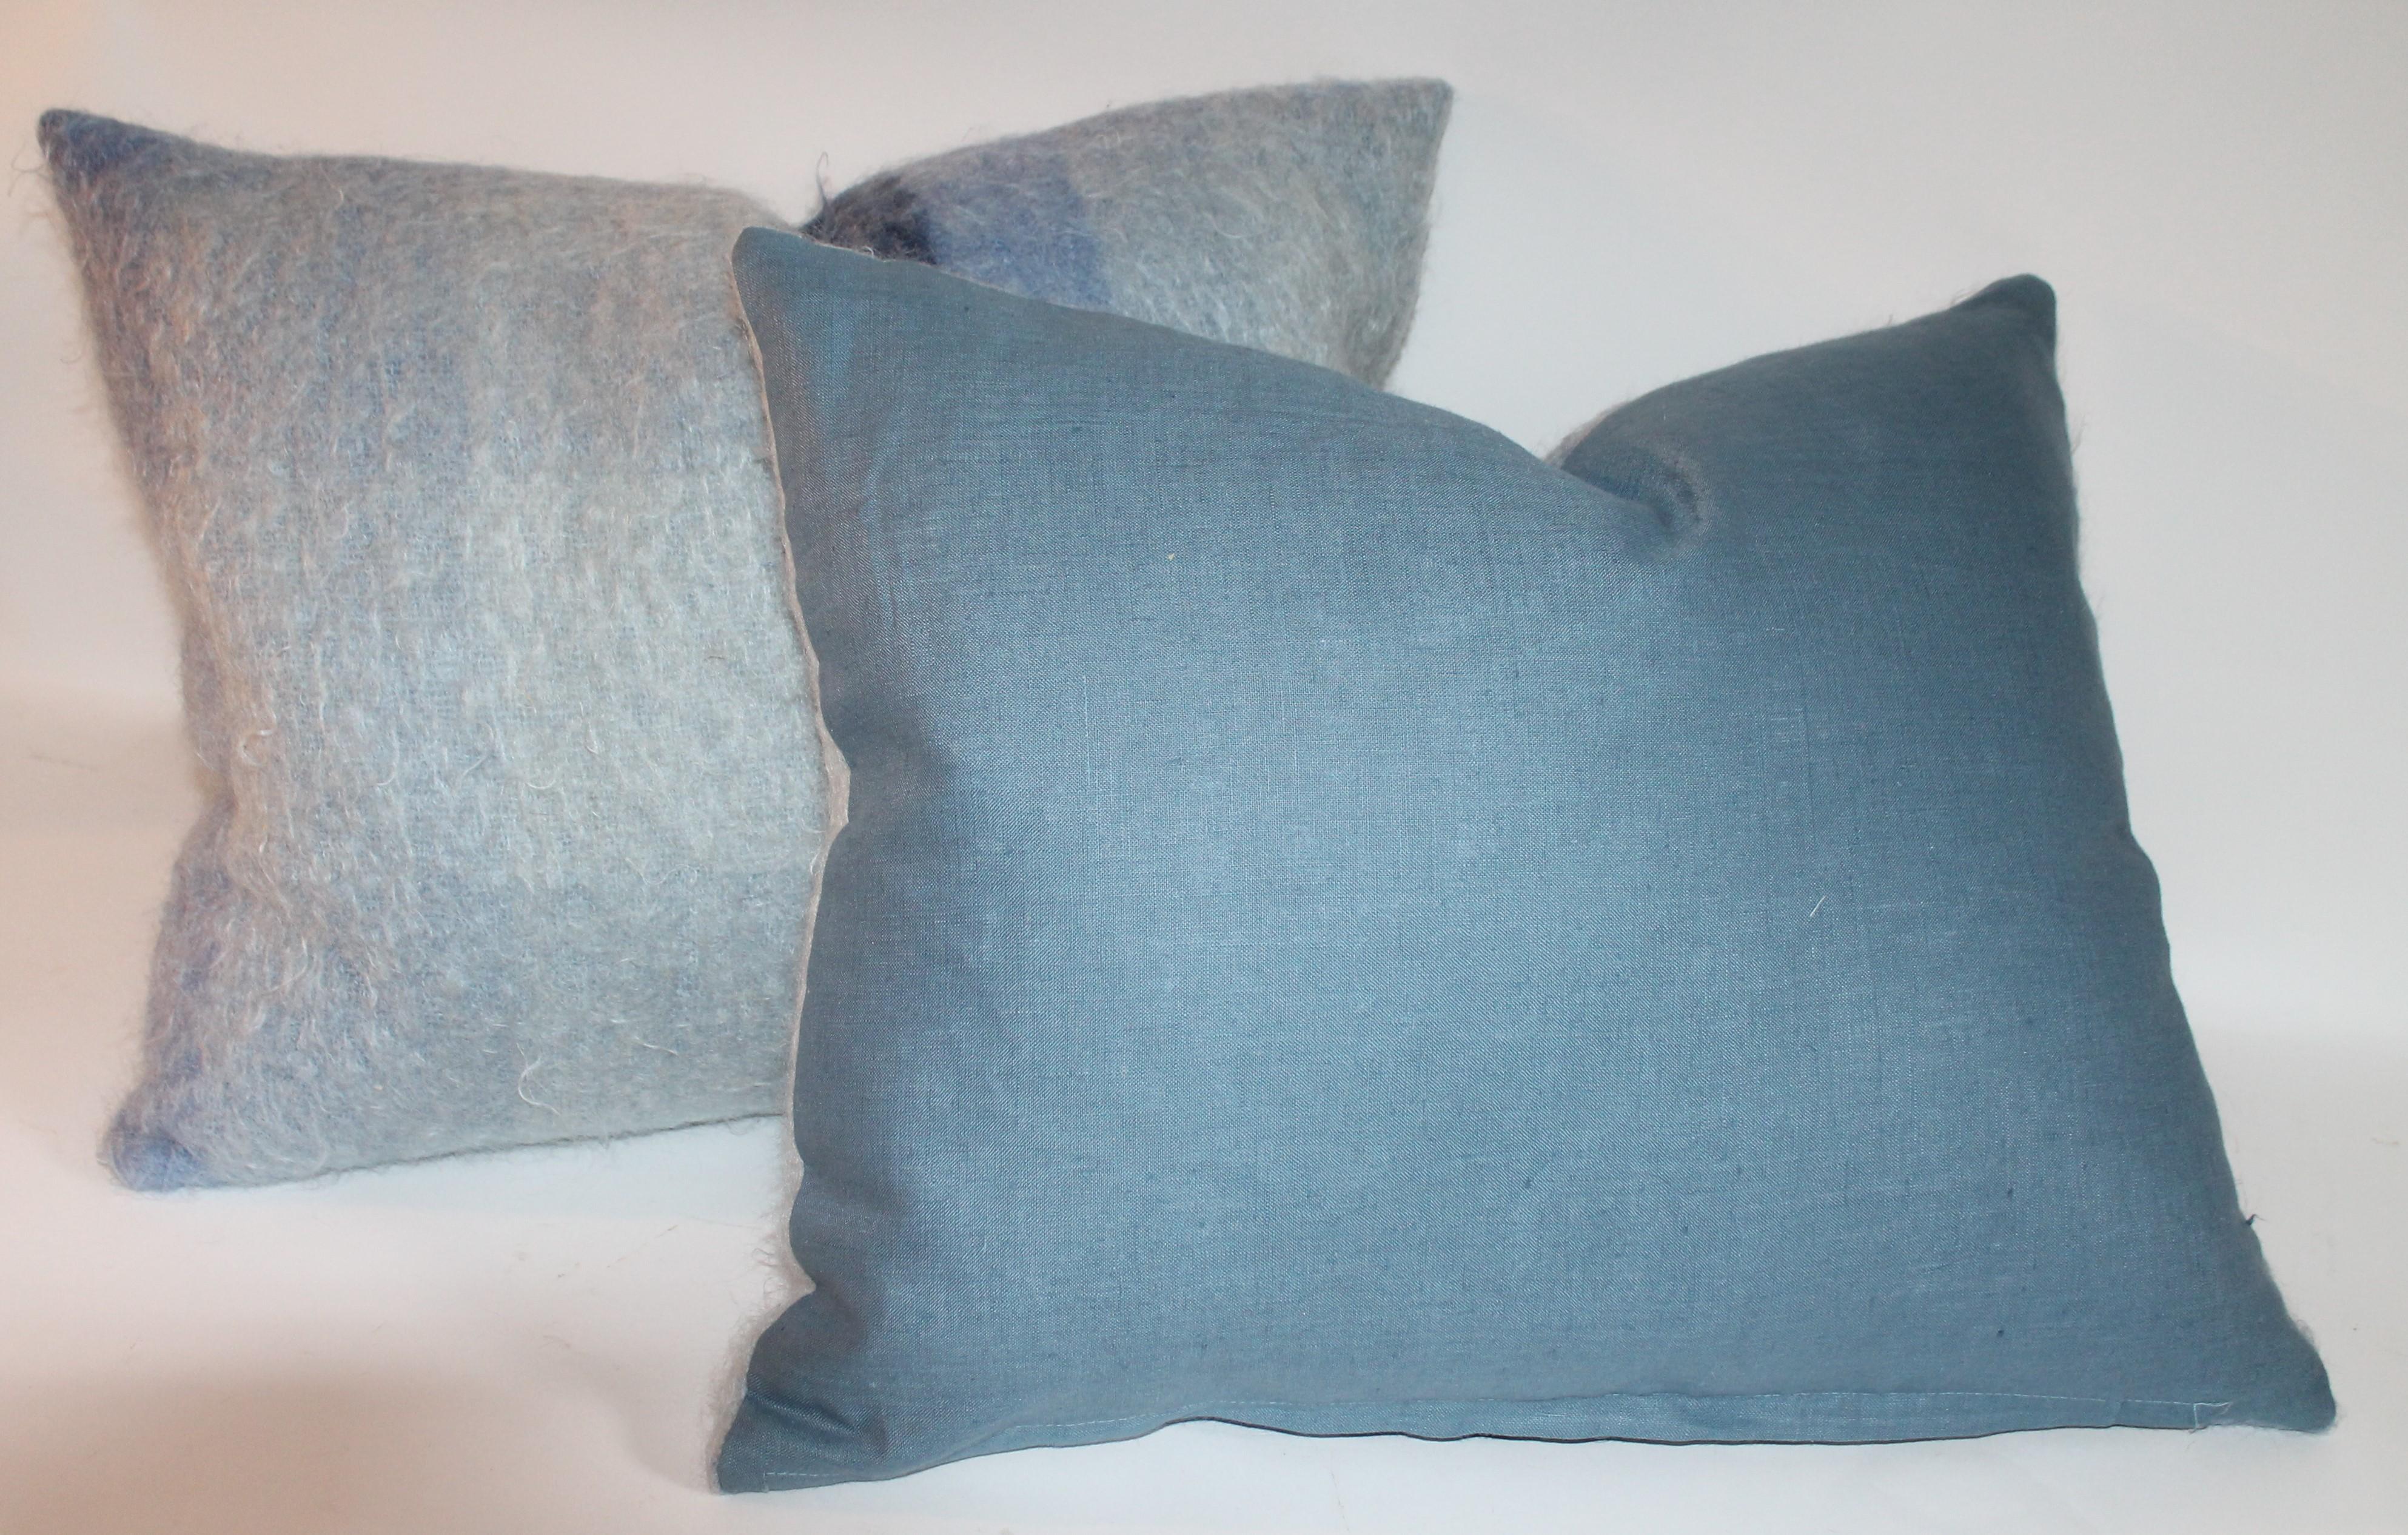 Mohair Pillows in Blues from Vintage Blanket, Pair 5